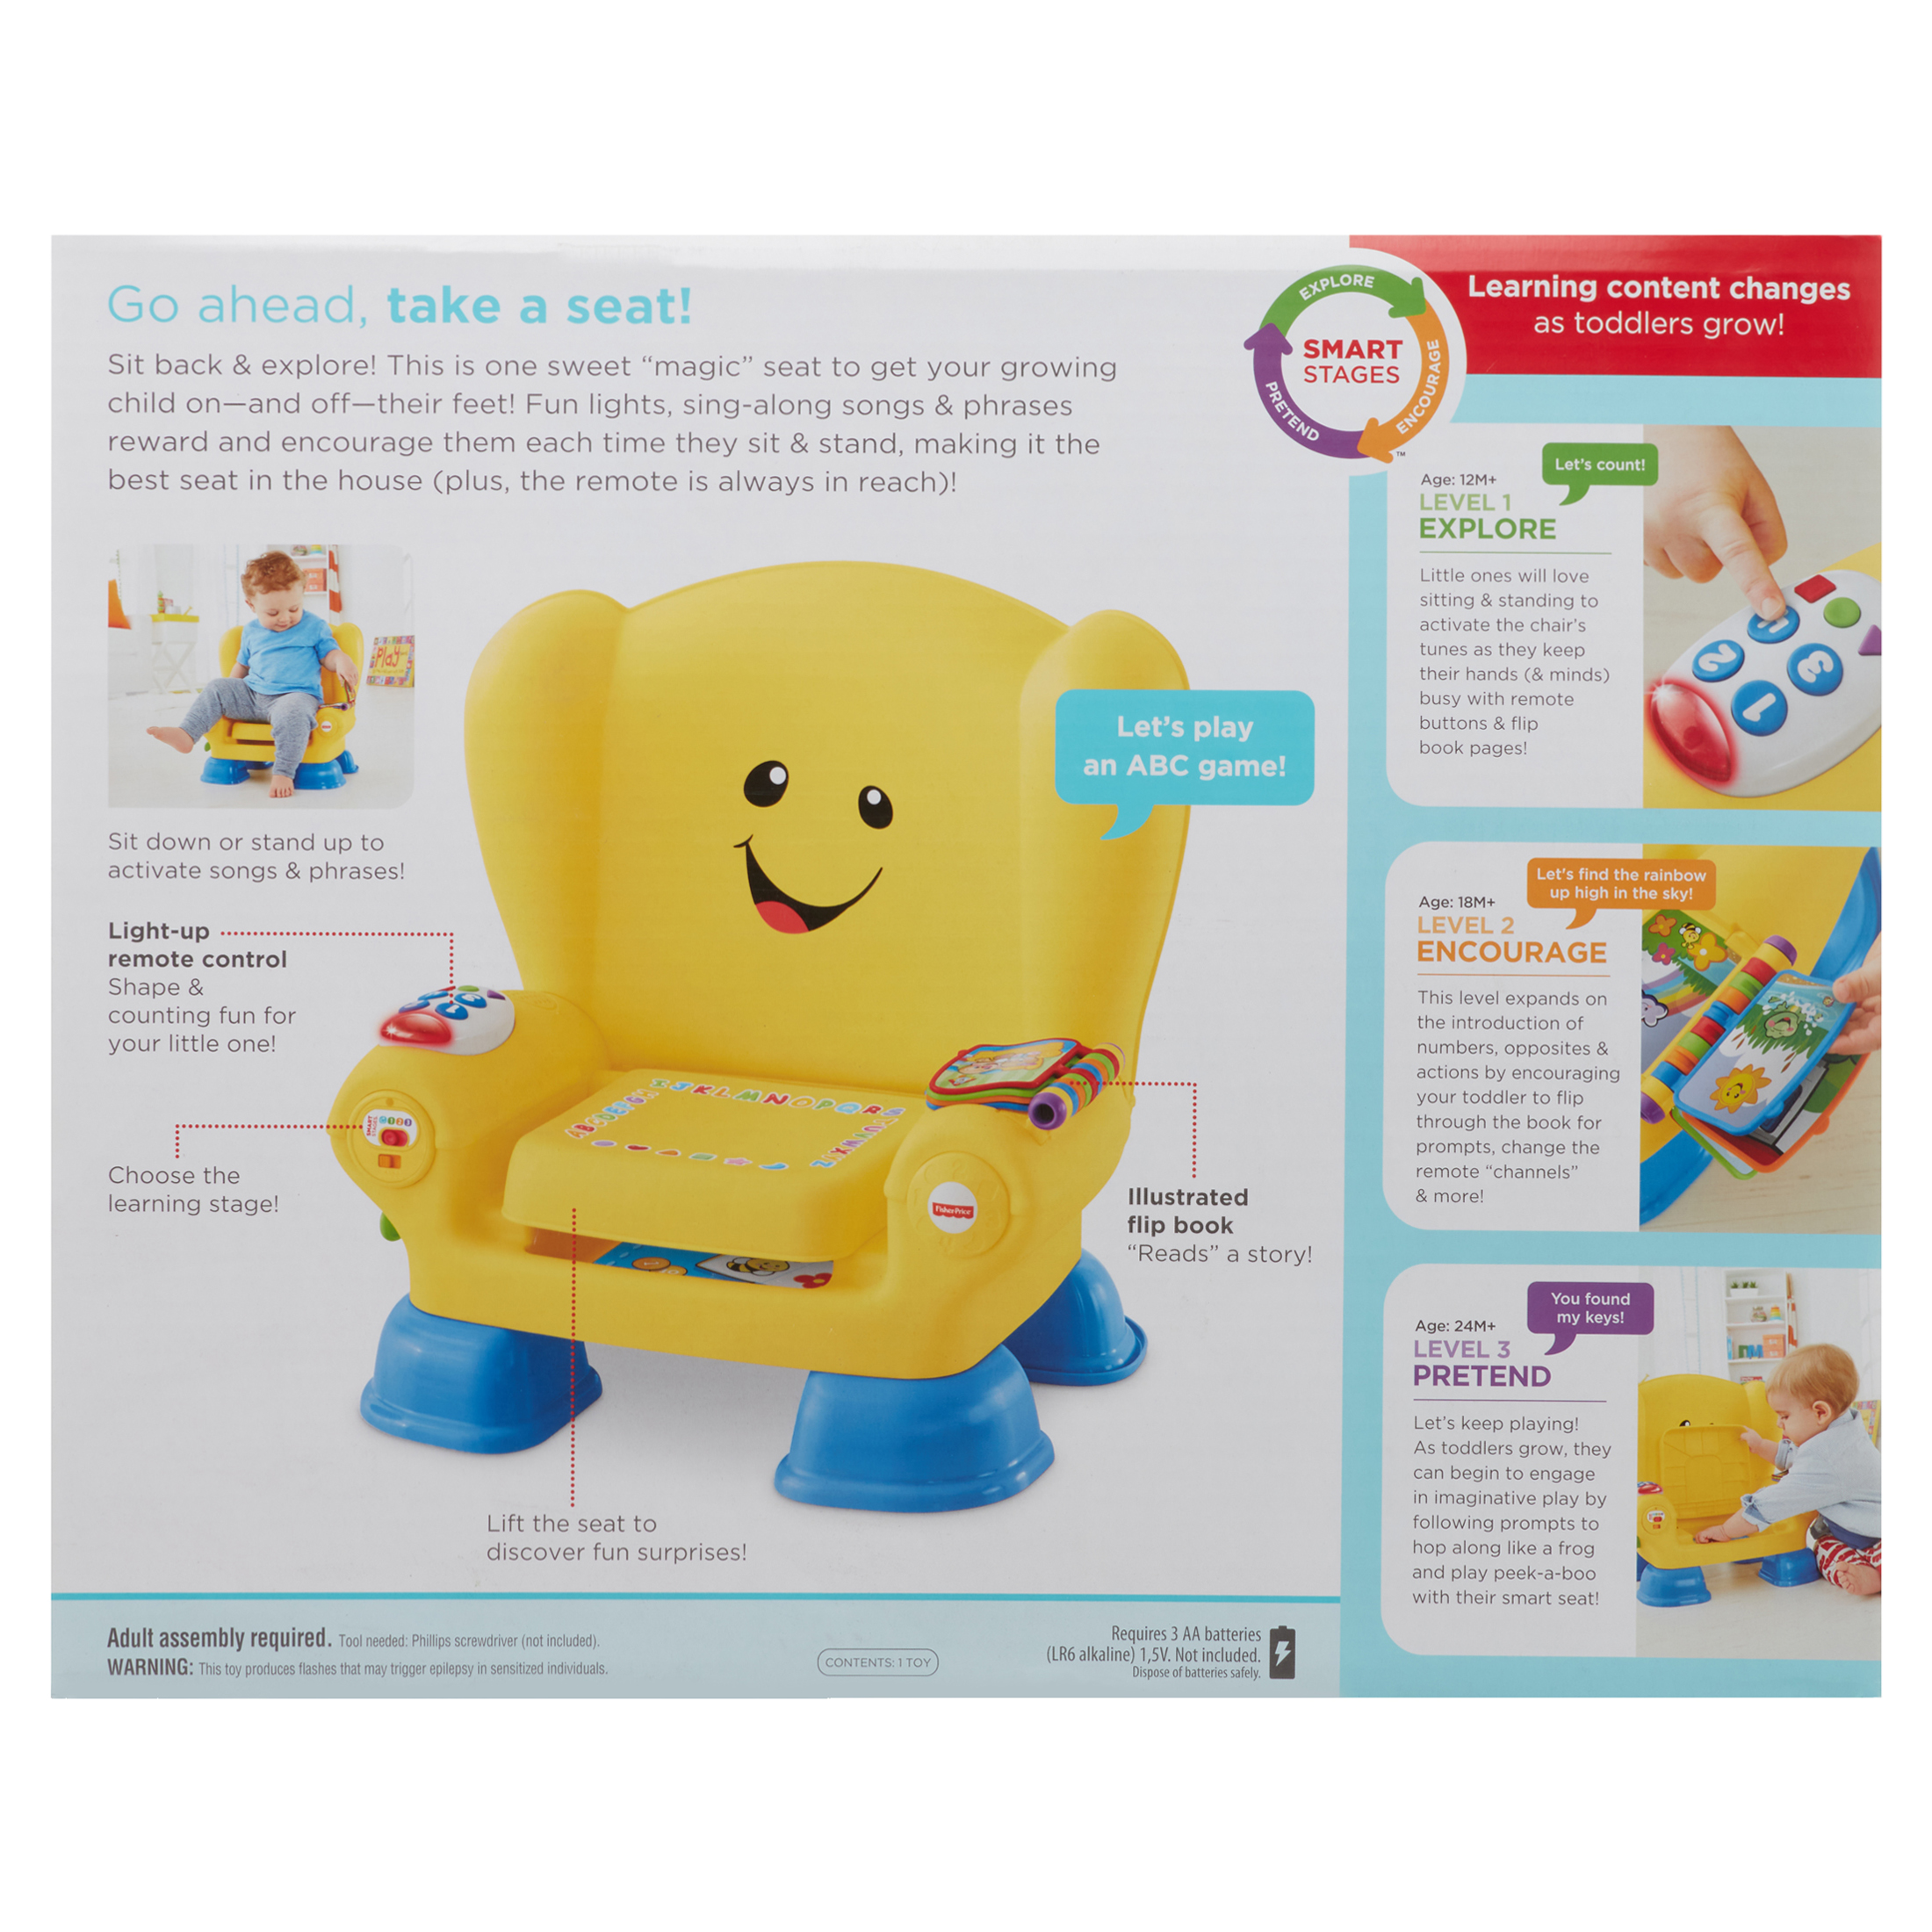 Buy Fisher Price Laugh Learn Smart Stages Chair